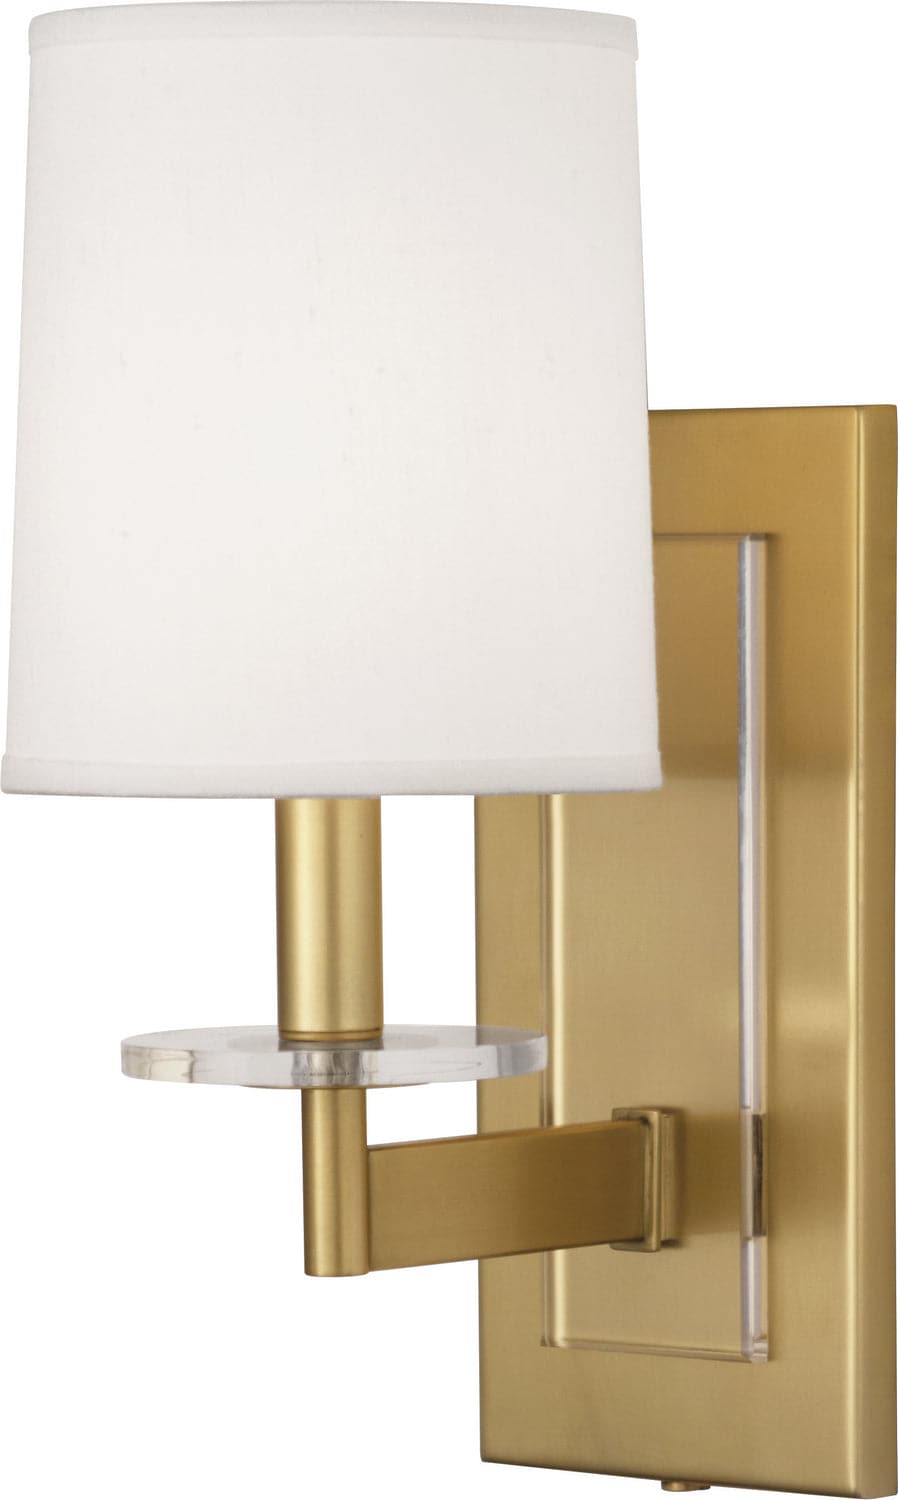 Robert Abbey - 3381 - One Light Wall Sconce - Alice - Antique Brass w/Lucite